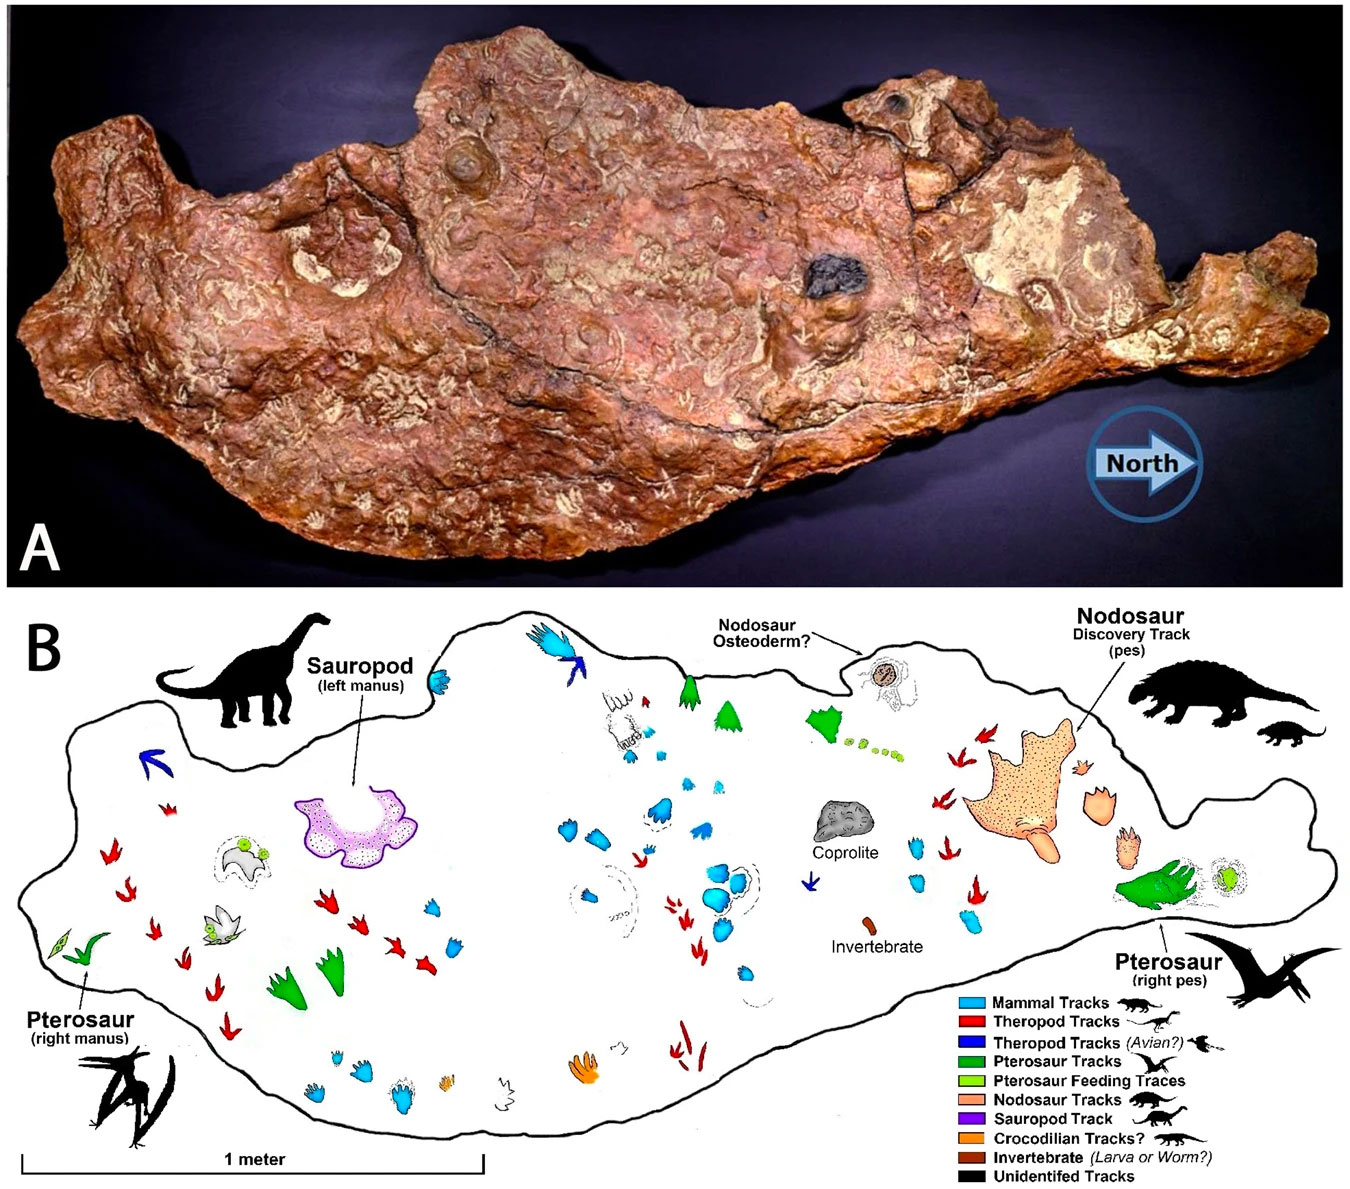 Photograph and drawing of an Early Cretaceous fossil trackway that was found on the campus of the NASA Goddard Space Flight Center in Maryland. The image shows a photograph of a rock slab with the tracks of dinosaurs and other animals. Below the photo, a drawing shows the trackways more clearly.